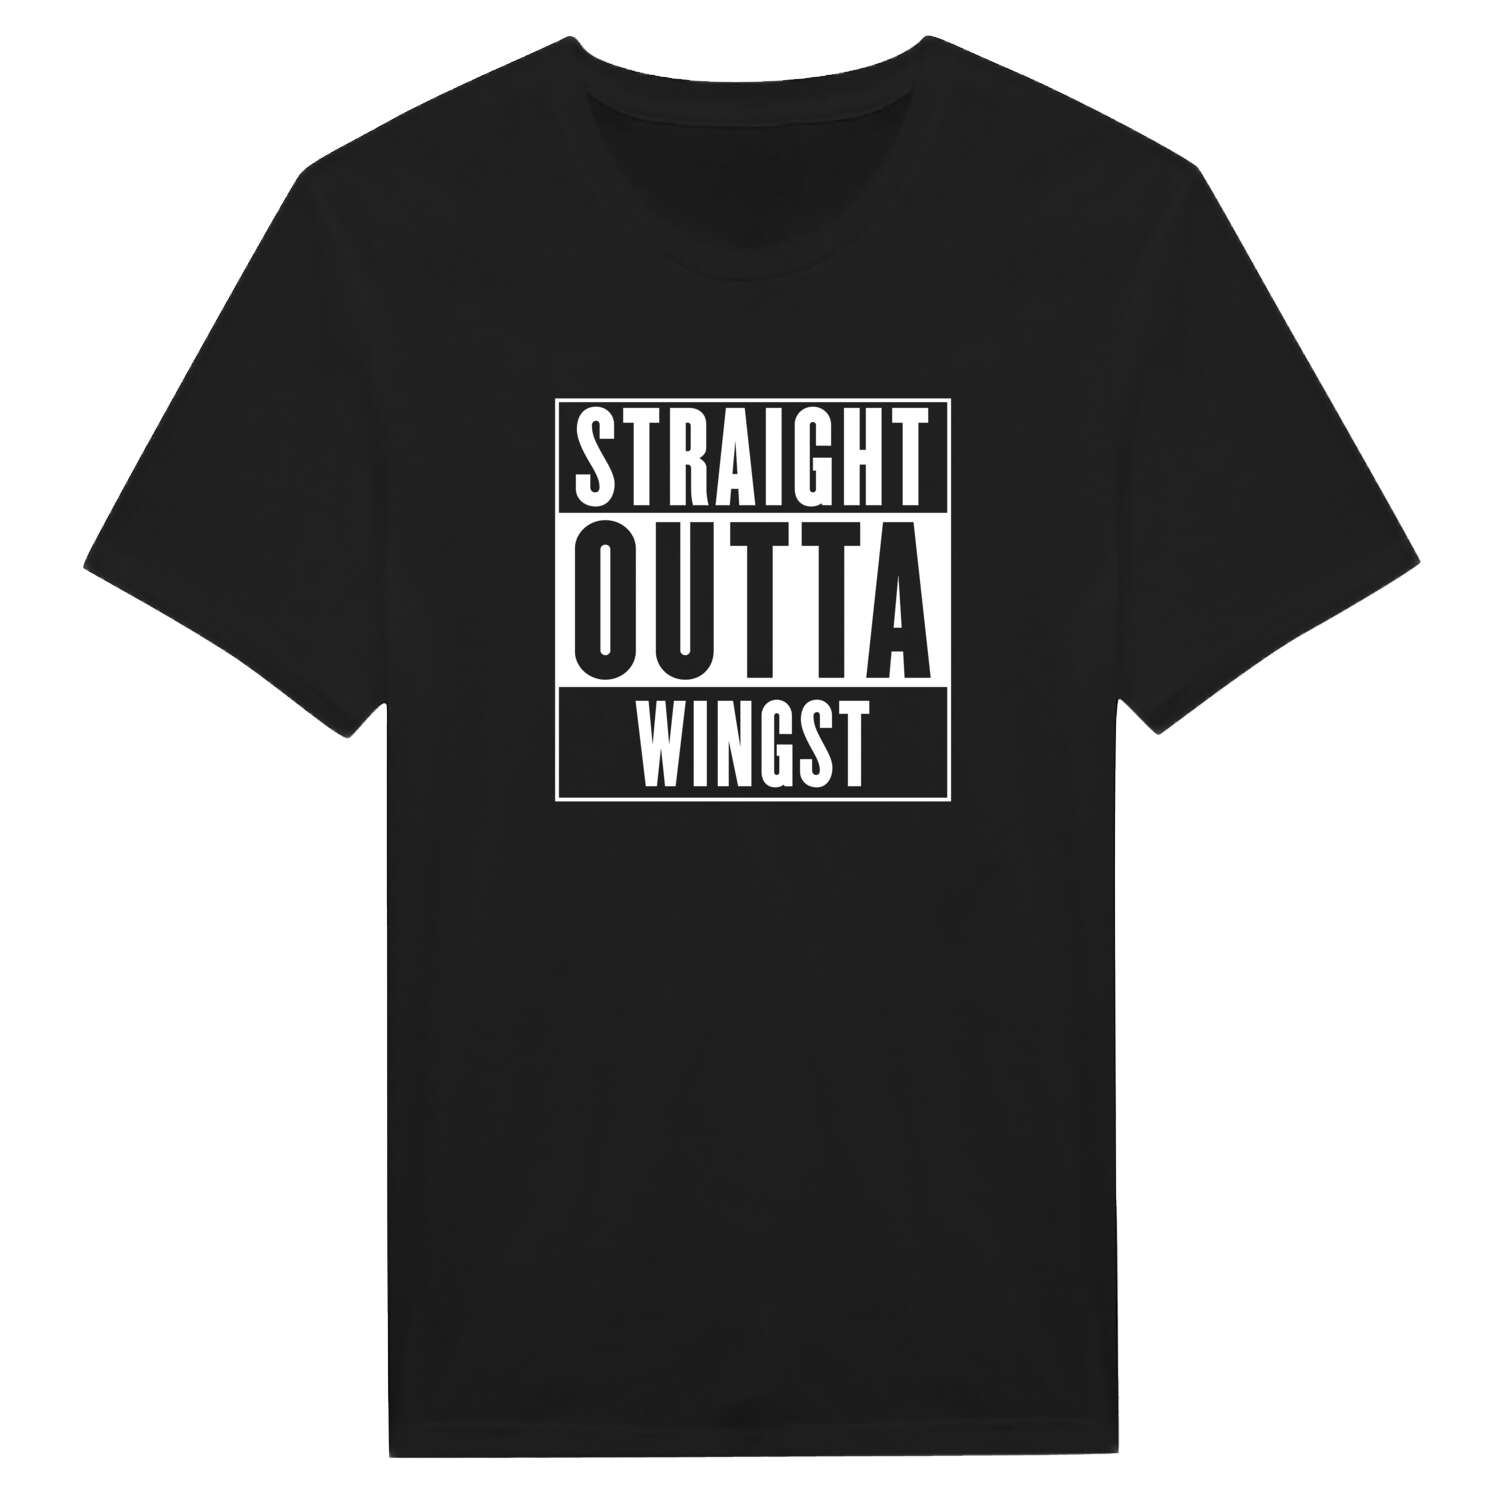 Wingst T-Shirt »Straight Outta«